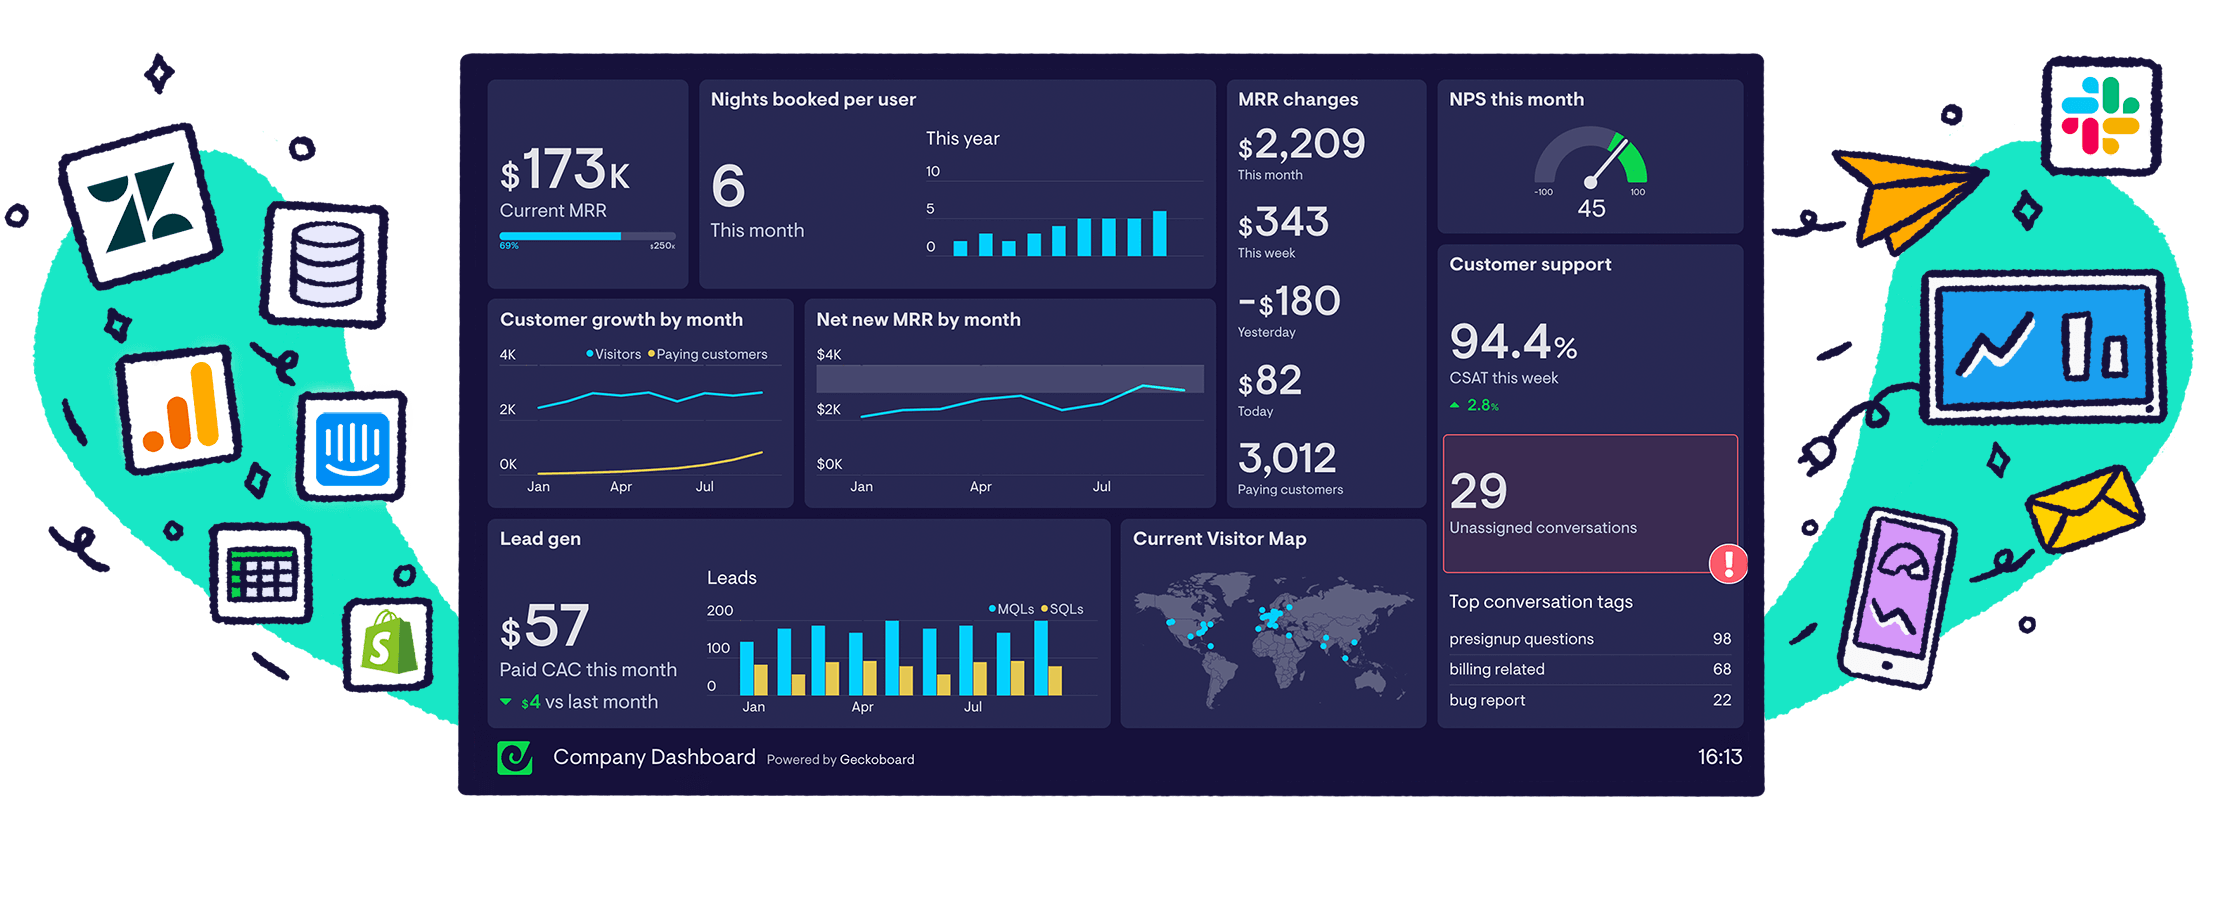 Real-time data, KPI and metrics dashboards from Geckoboard